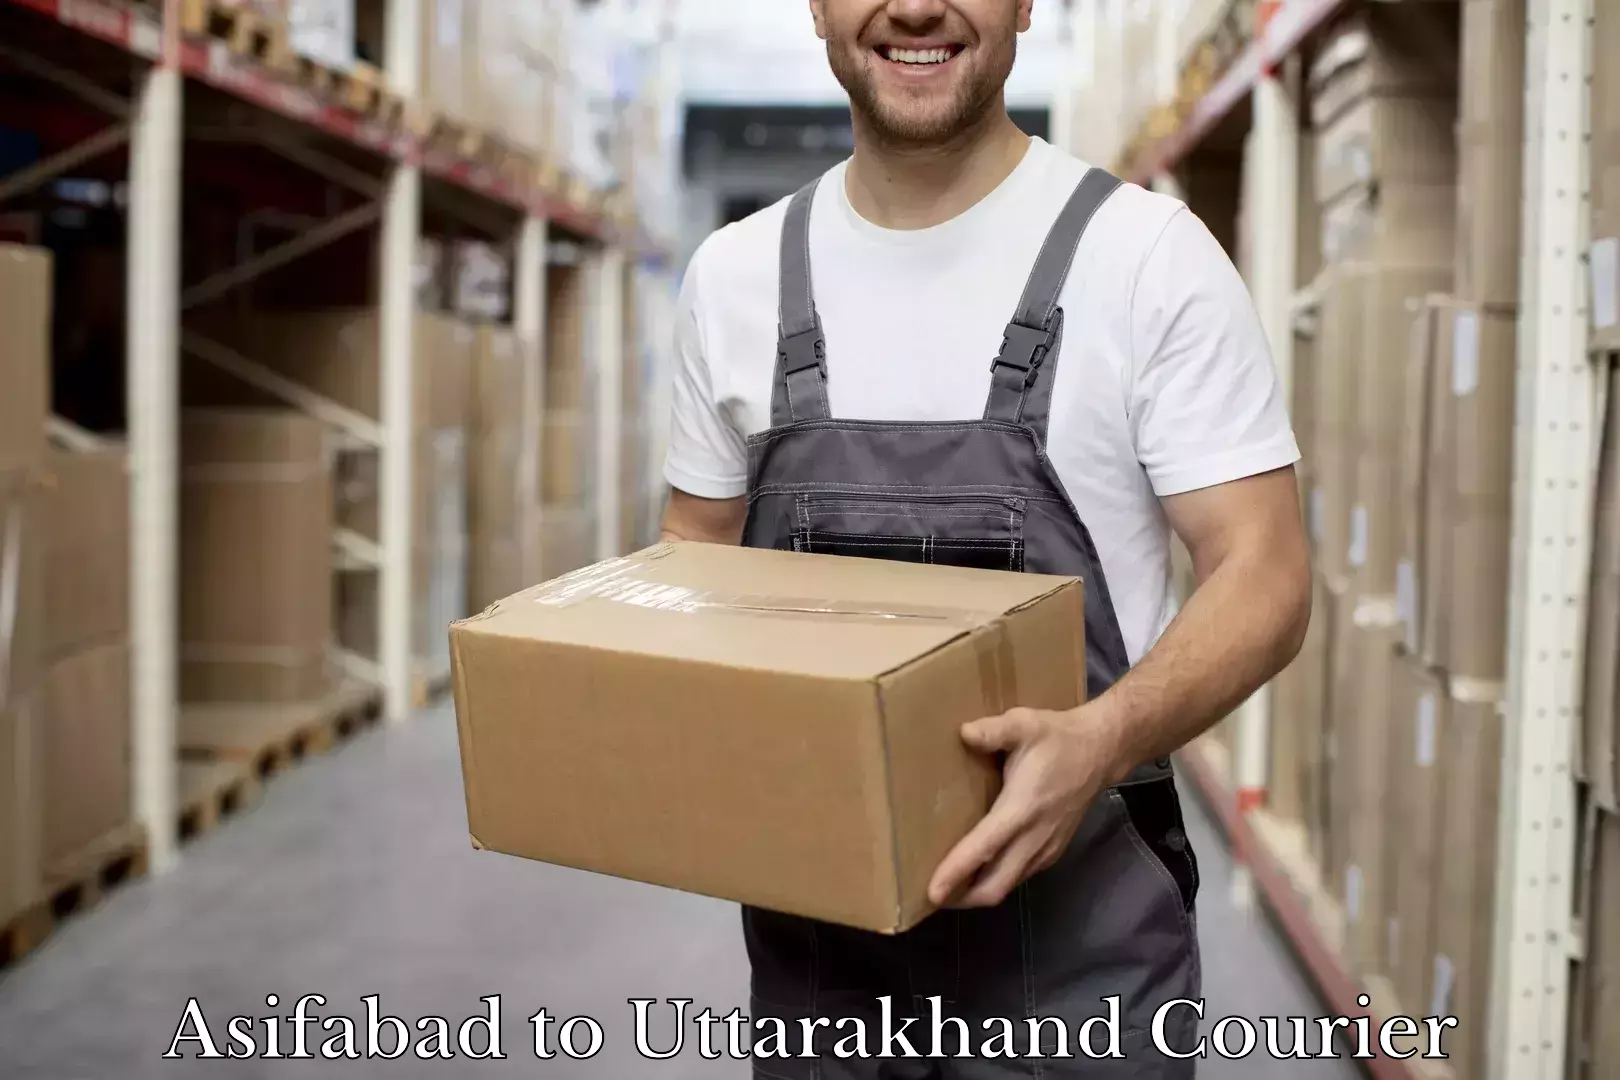 Luggage shipping planner Asifabad to Rudrapur